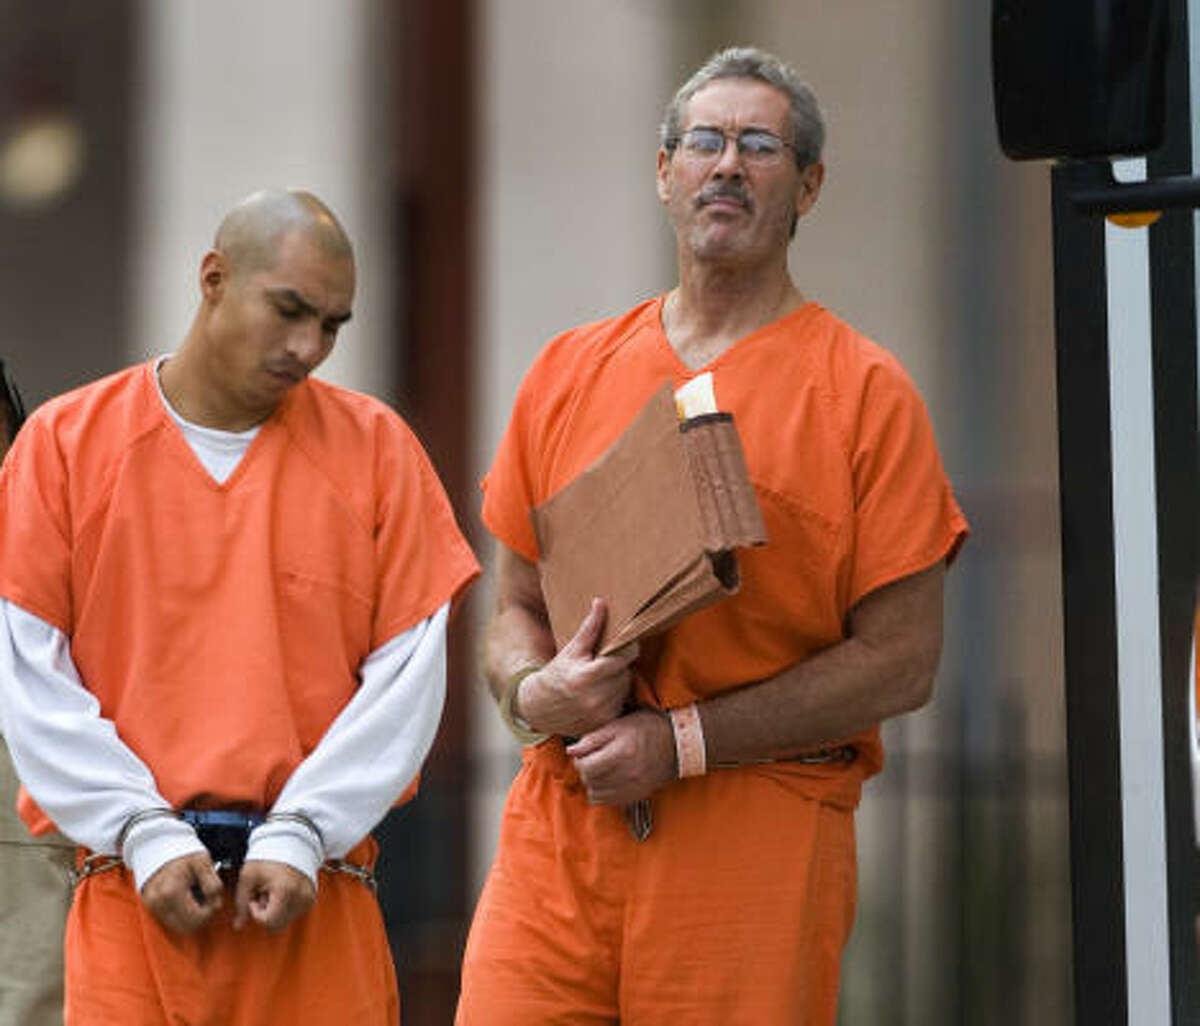 R. Allen Stanford, right, arrives at the federal courthouse on Tuesday for his fraud case.